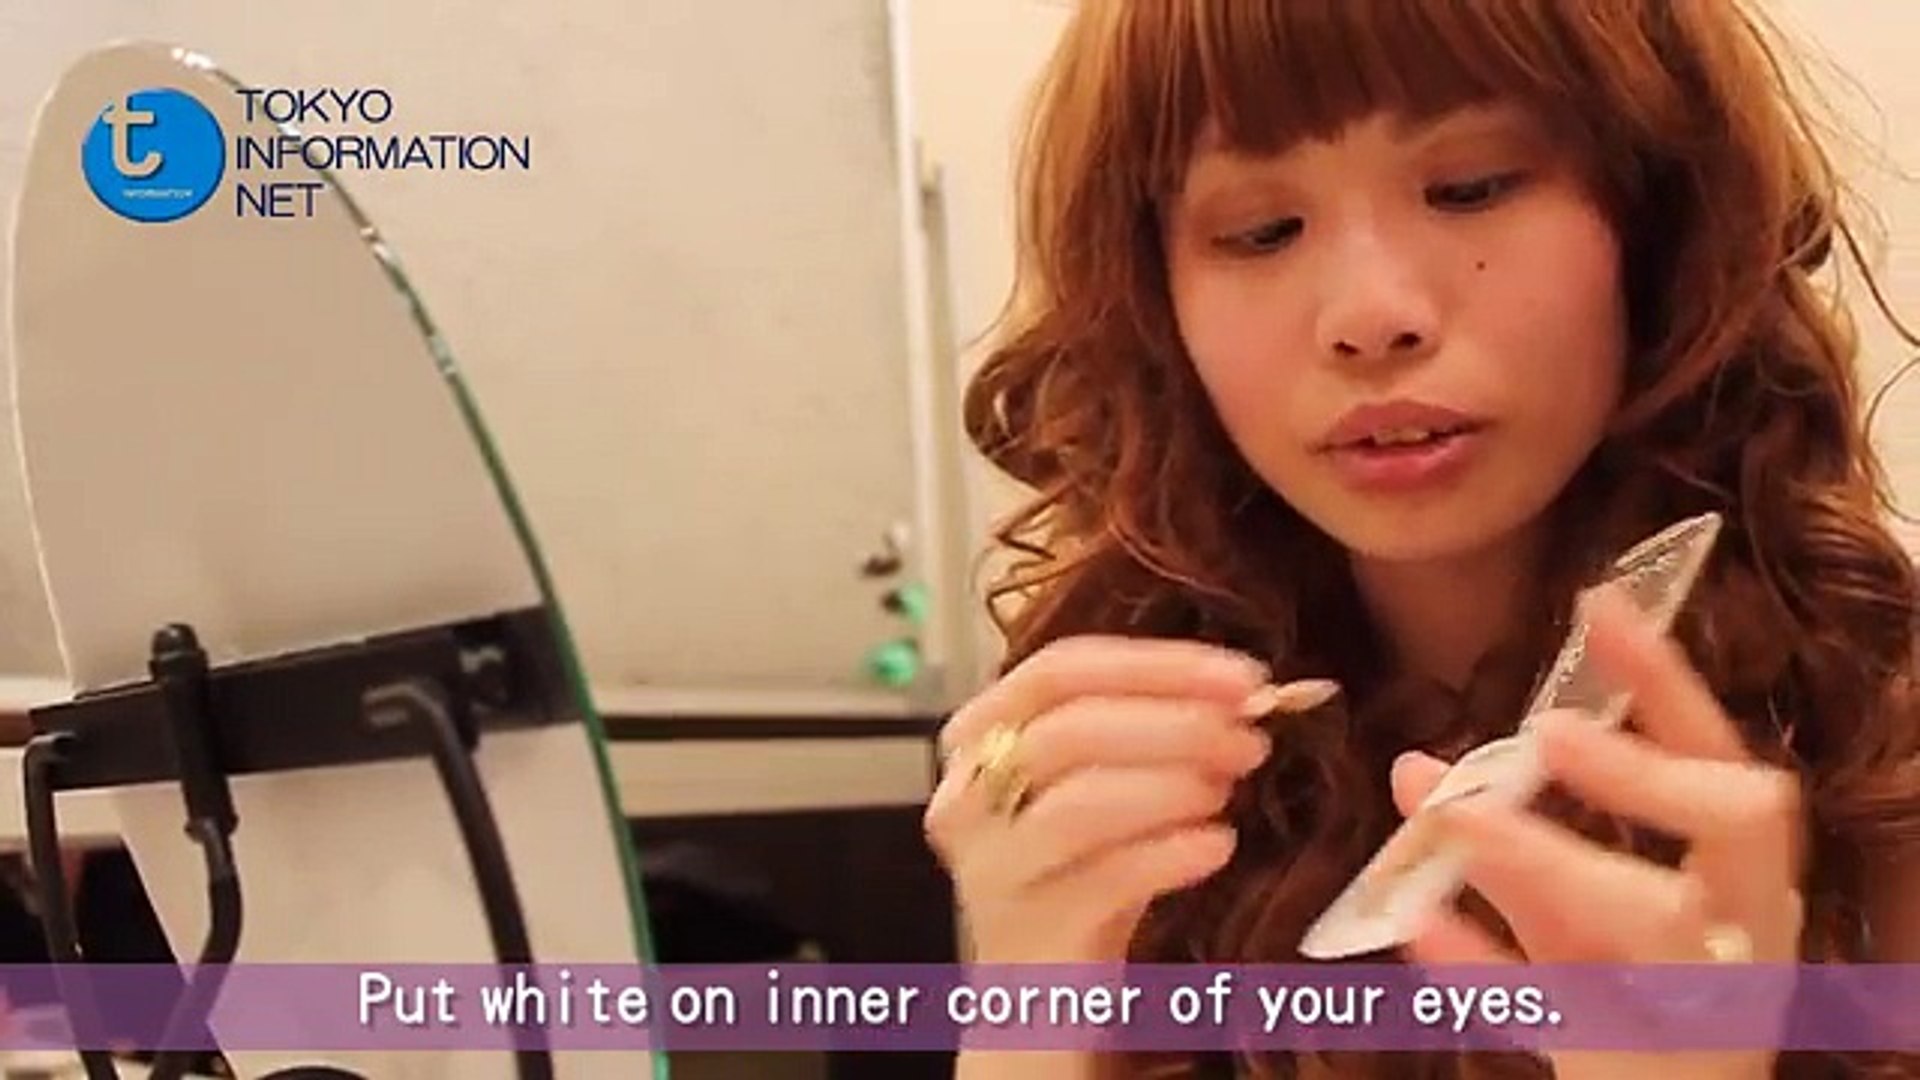 Japanese Girls: Latest Makeup Style in Tokyopart1 (English subtitle Version)